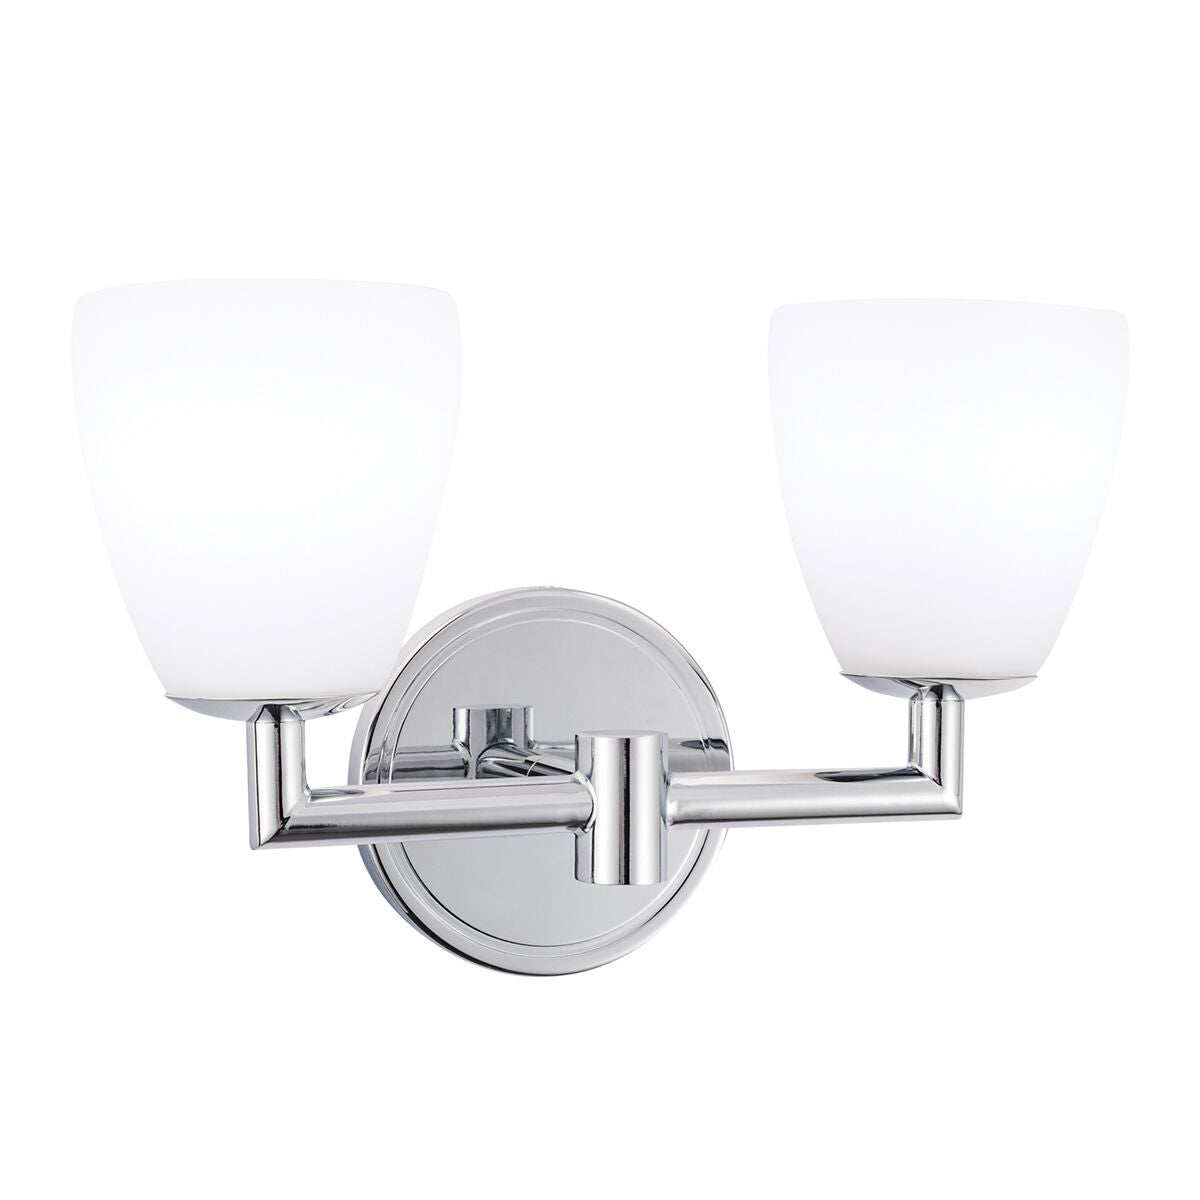 Norwell Chancellor 8272-CH-MO Bath Vanity Light 11 in. wide - Chrome